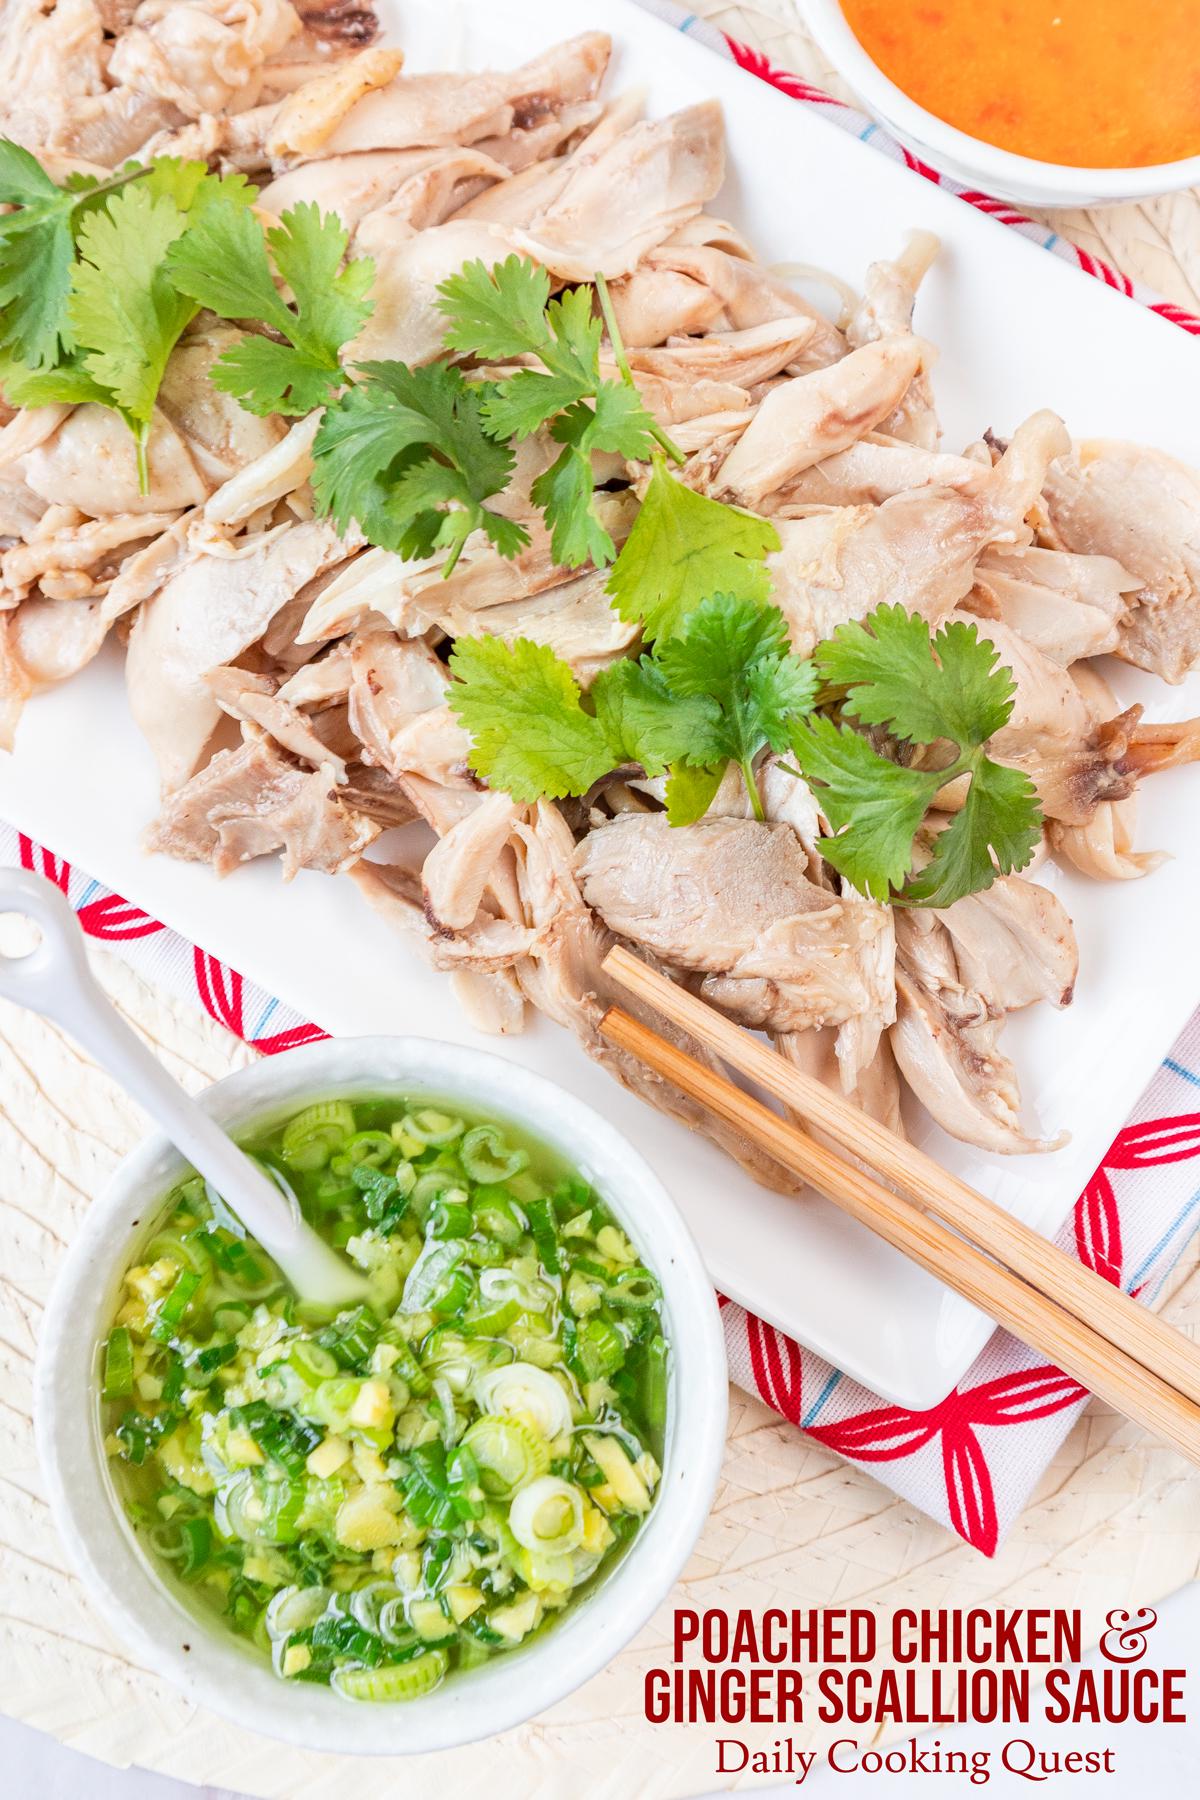 Poached Chicken and Ginger Scallion Sauce.